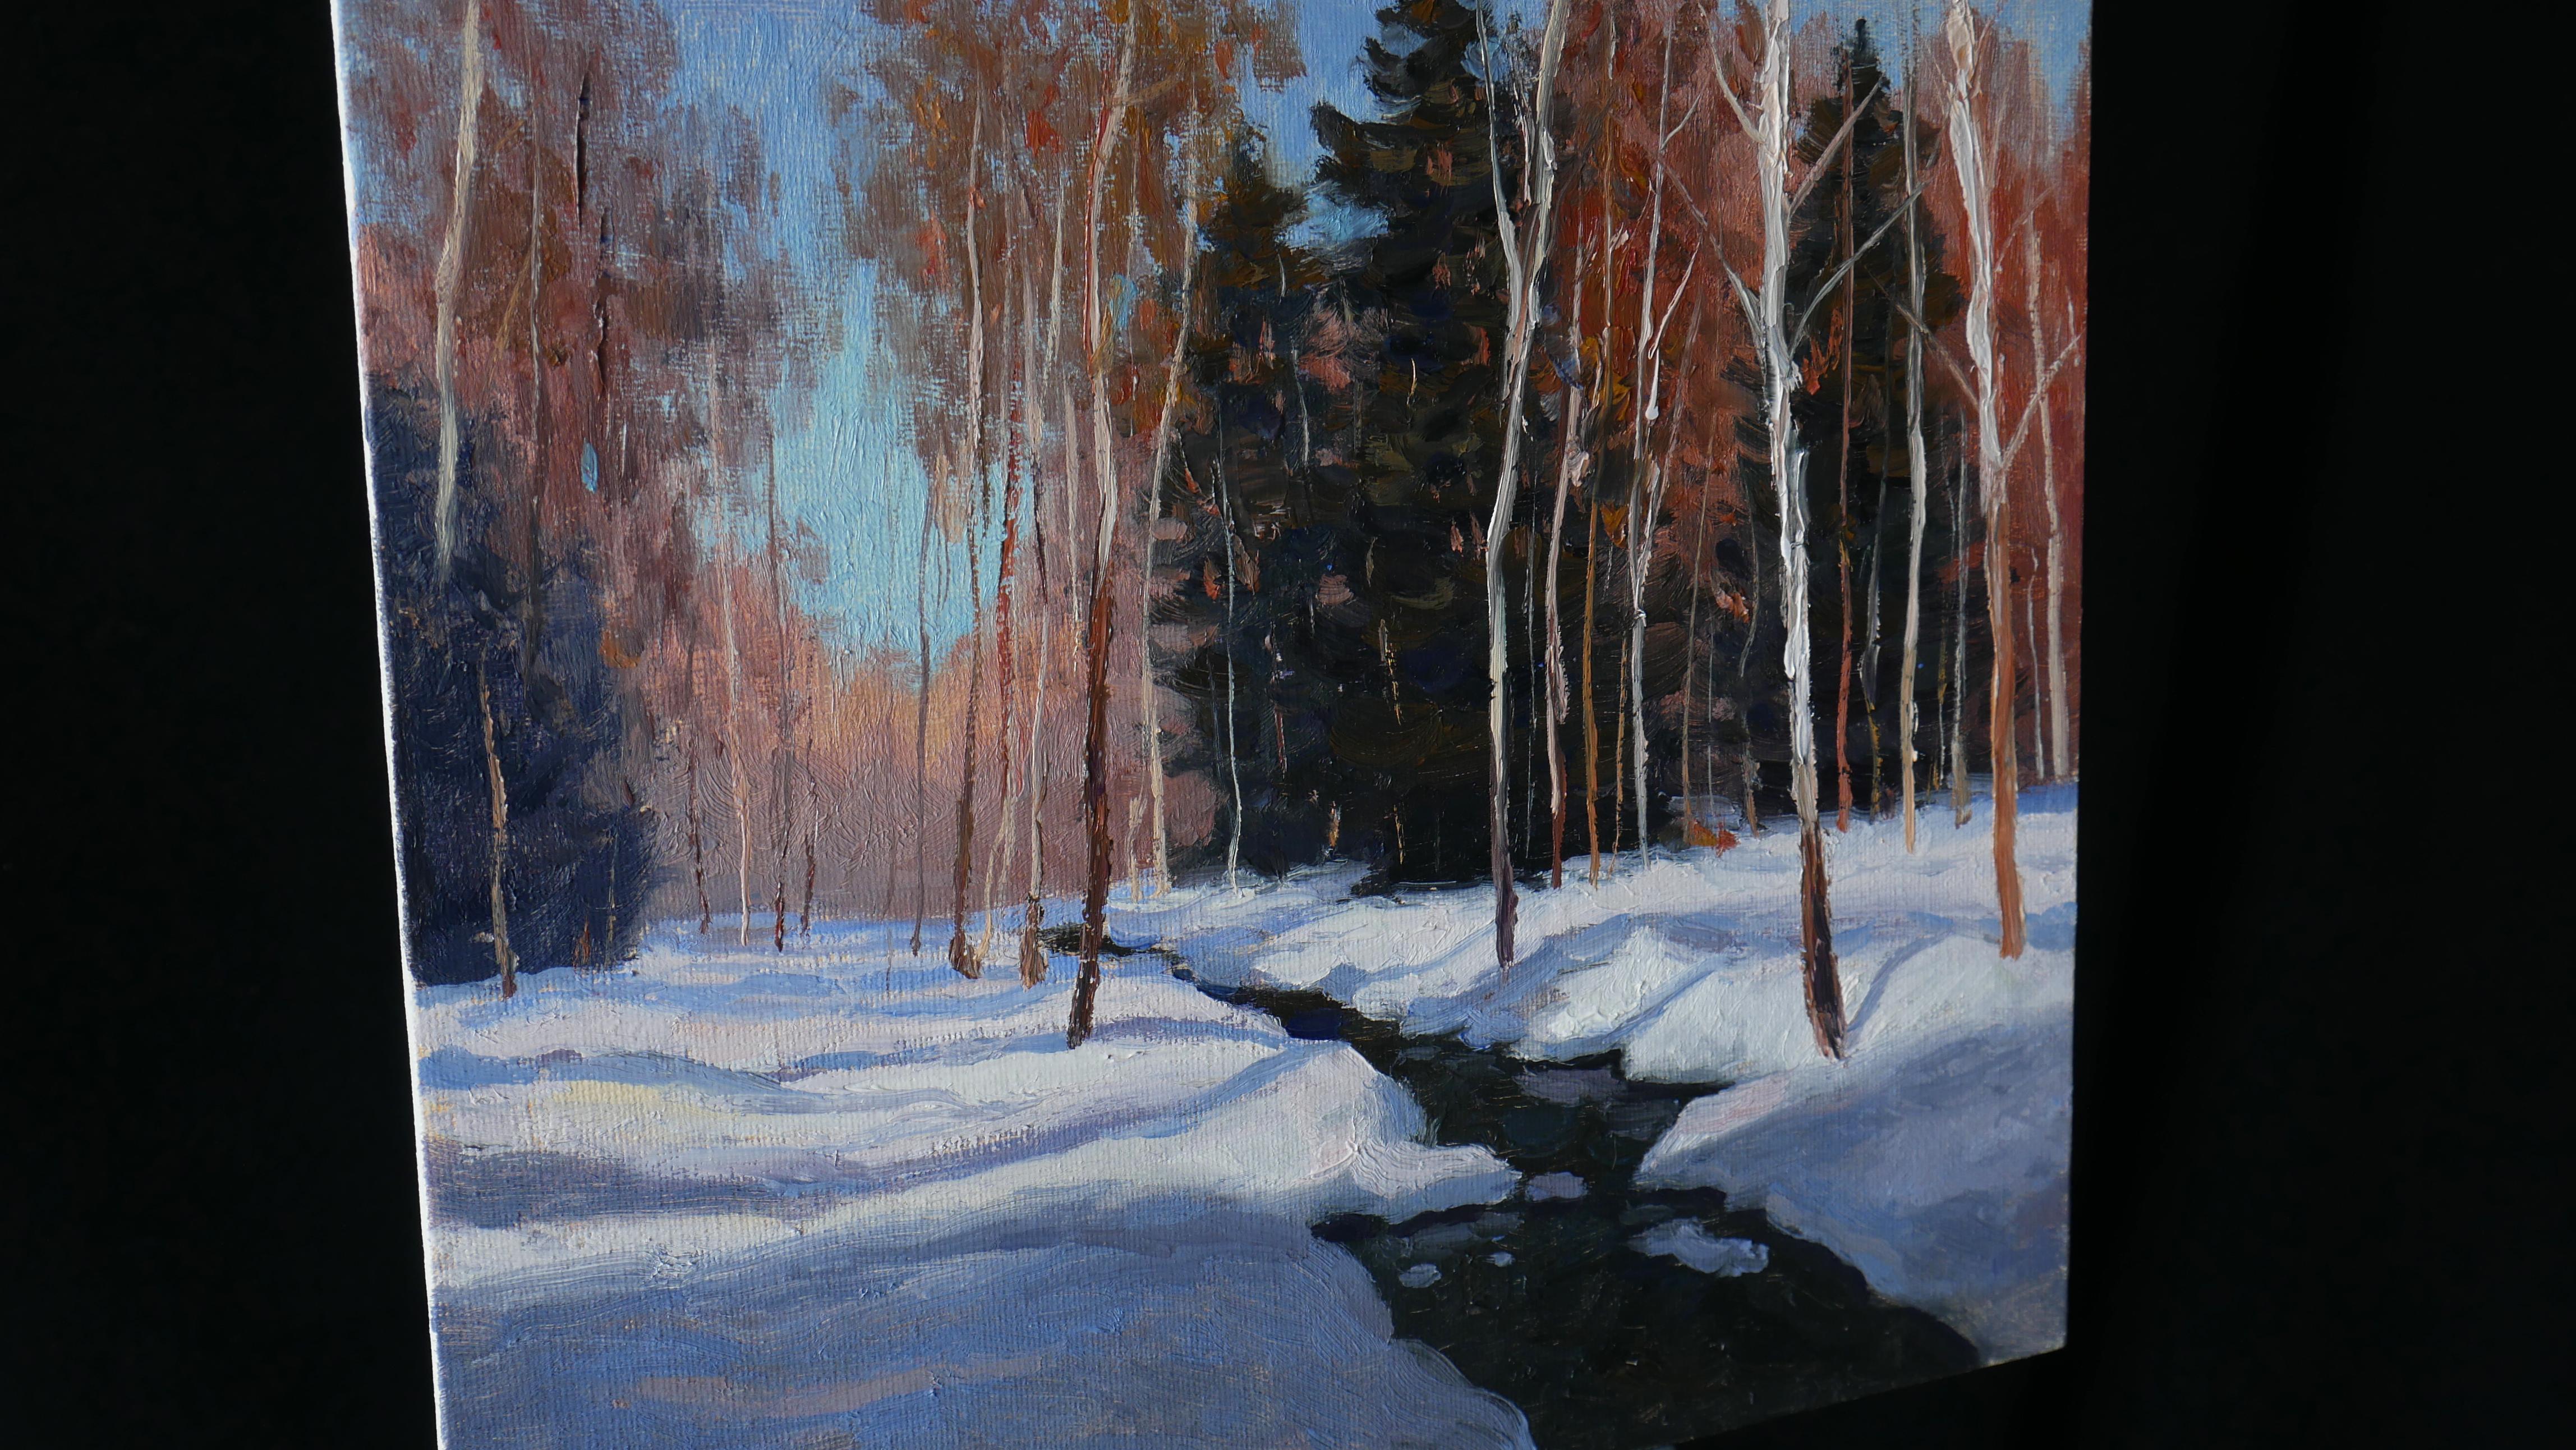 The Forest Brook - original sunny landscape, winter painting - Impressionist Painting by Nikolay Dmitriev